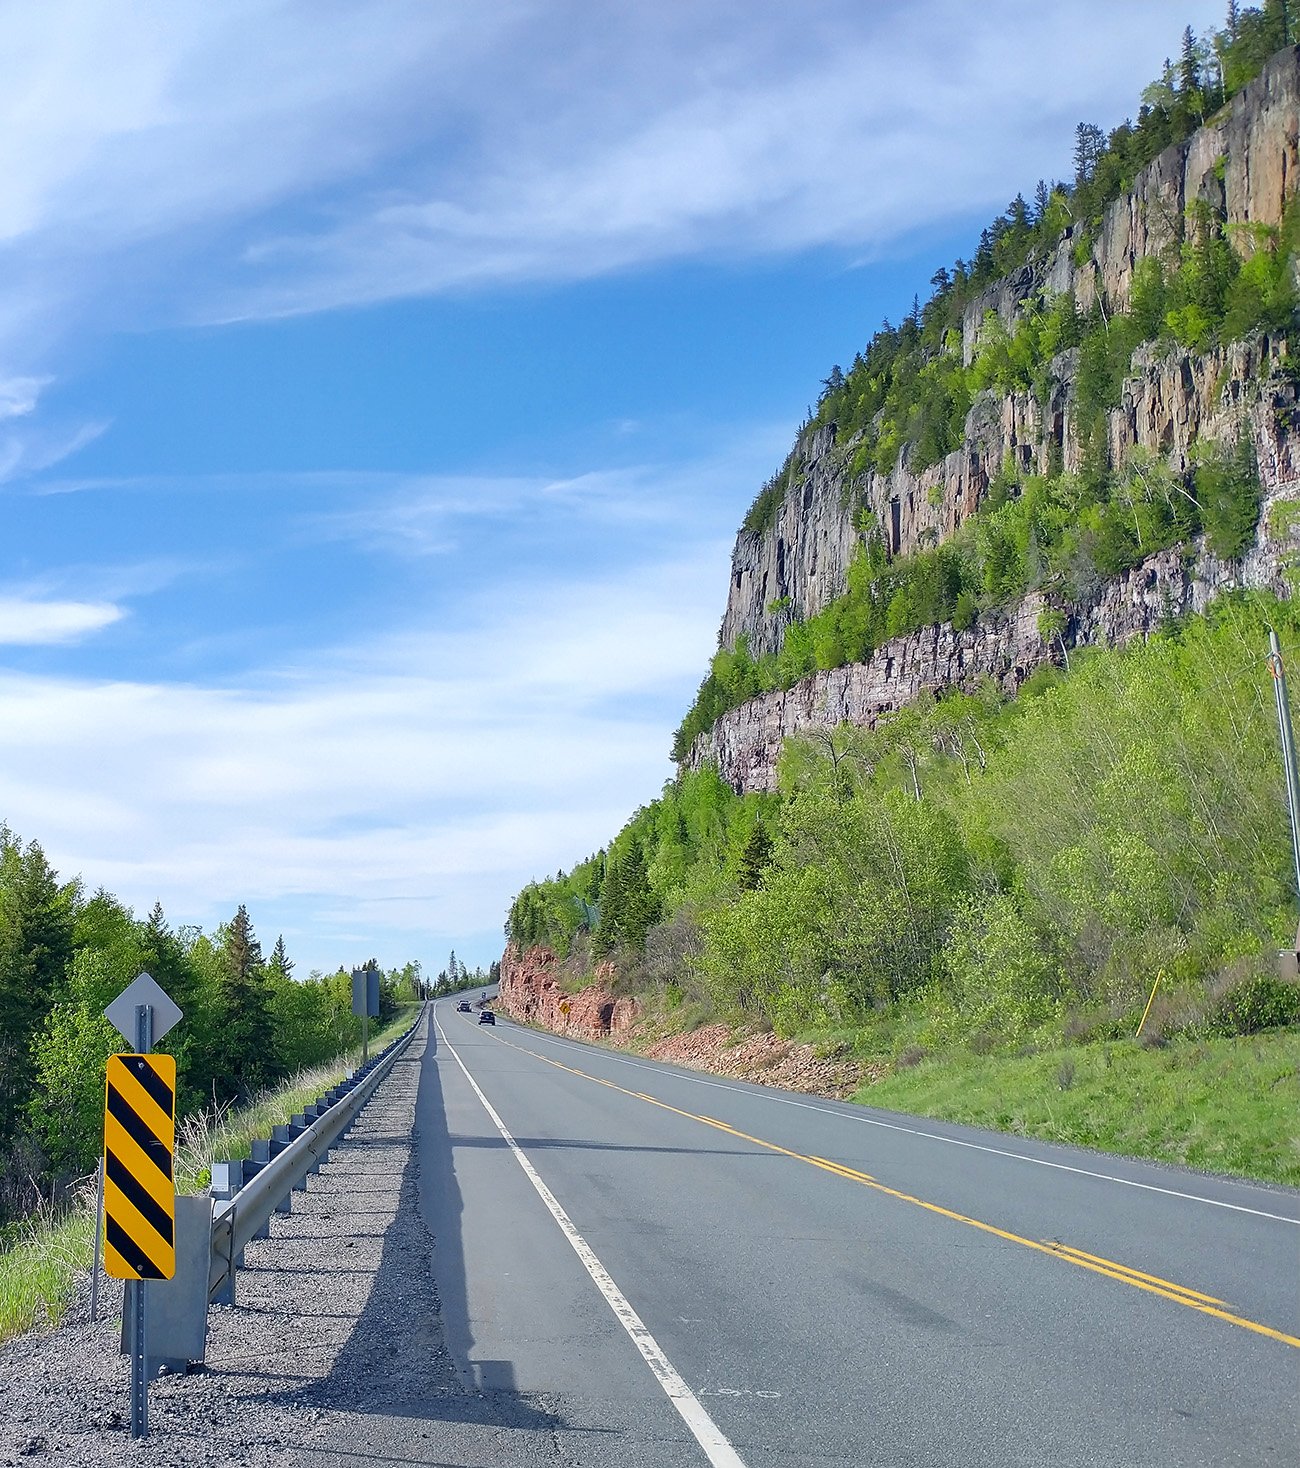 The drive alongside Lake Superior from Thunder Bay is surprisingly beautiful. Has many lookouts and mid-sized mountain passes.